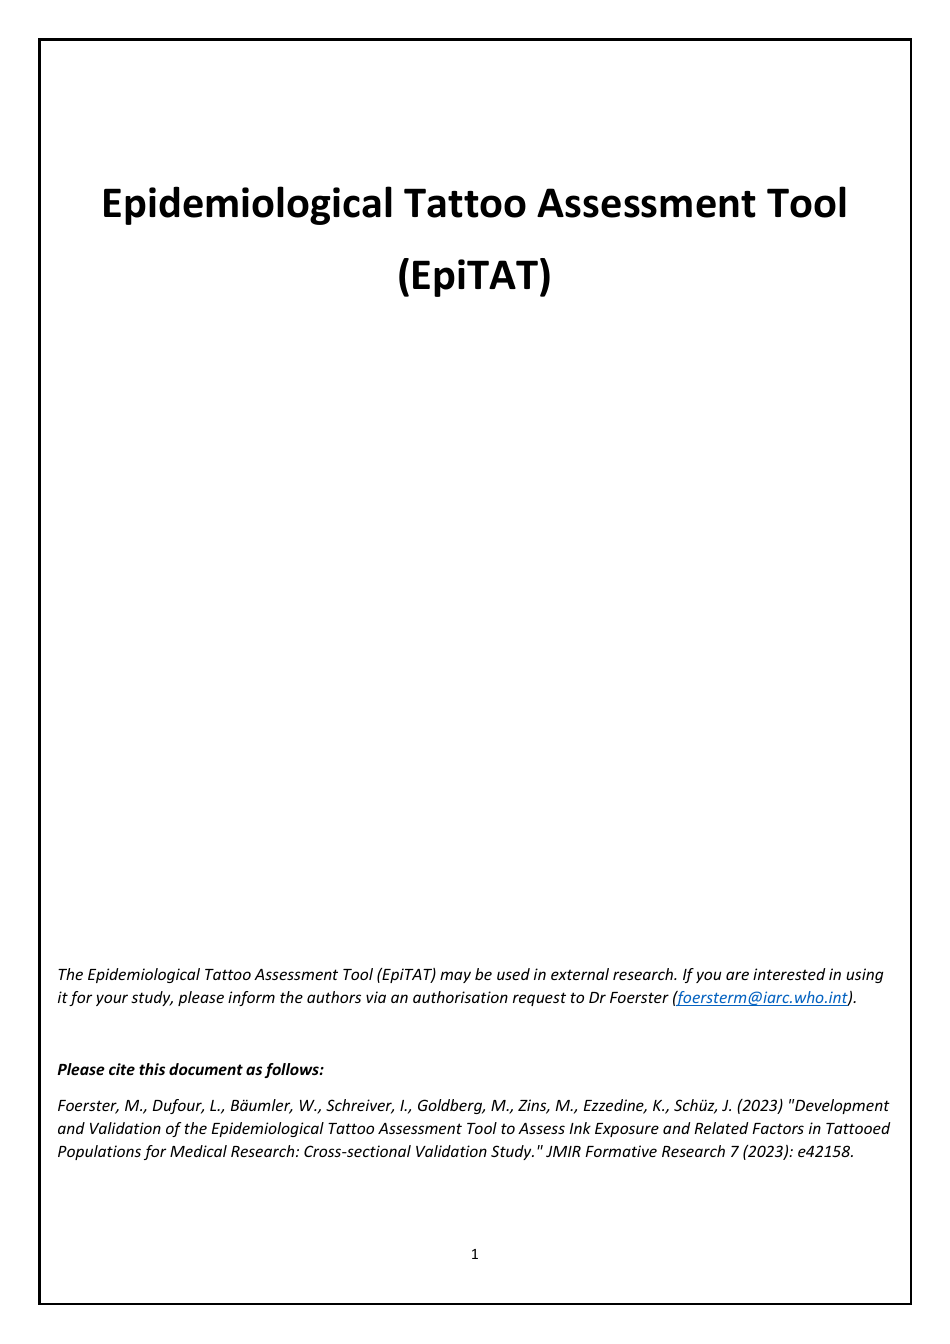 Epidemiological Tattoo Assessment Tool (Epitat) - Document Template Image Preview